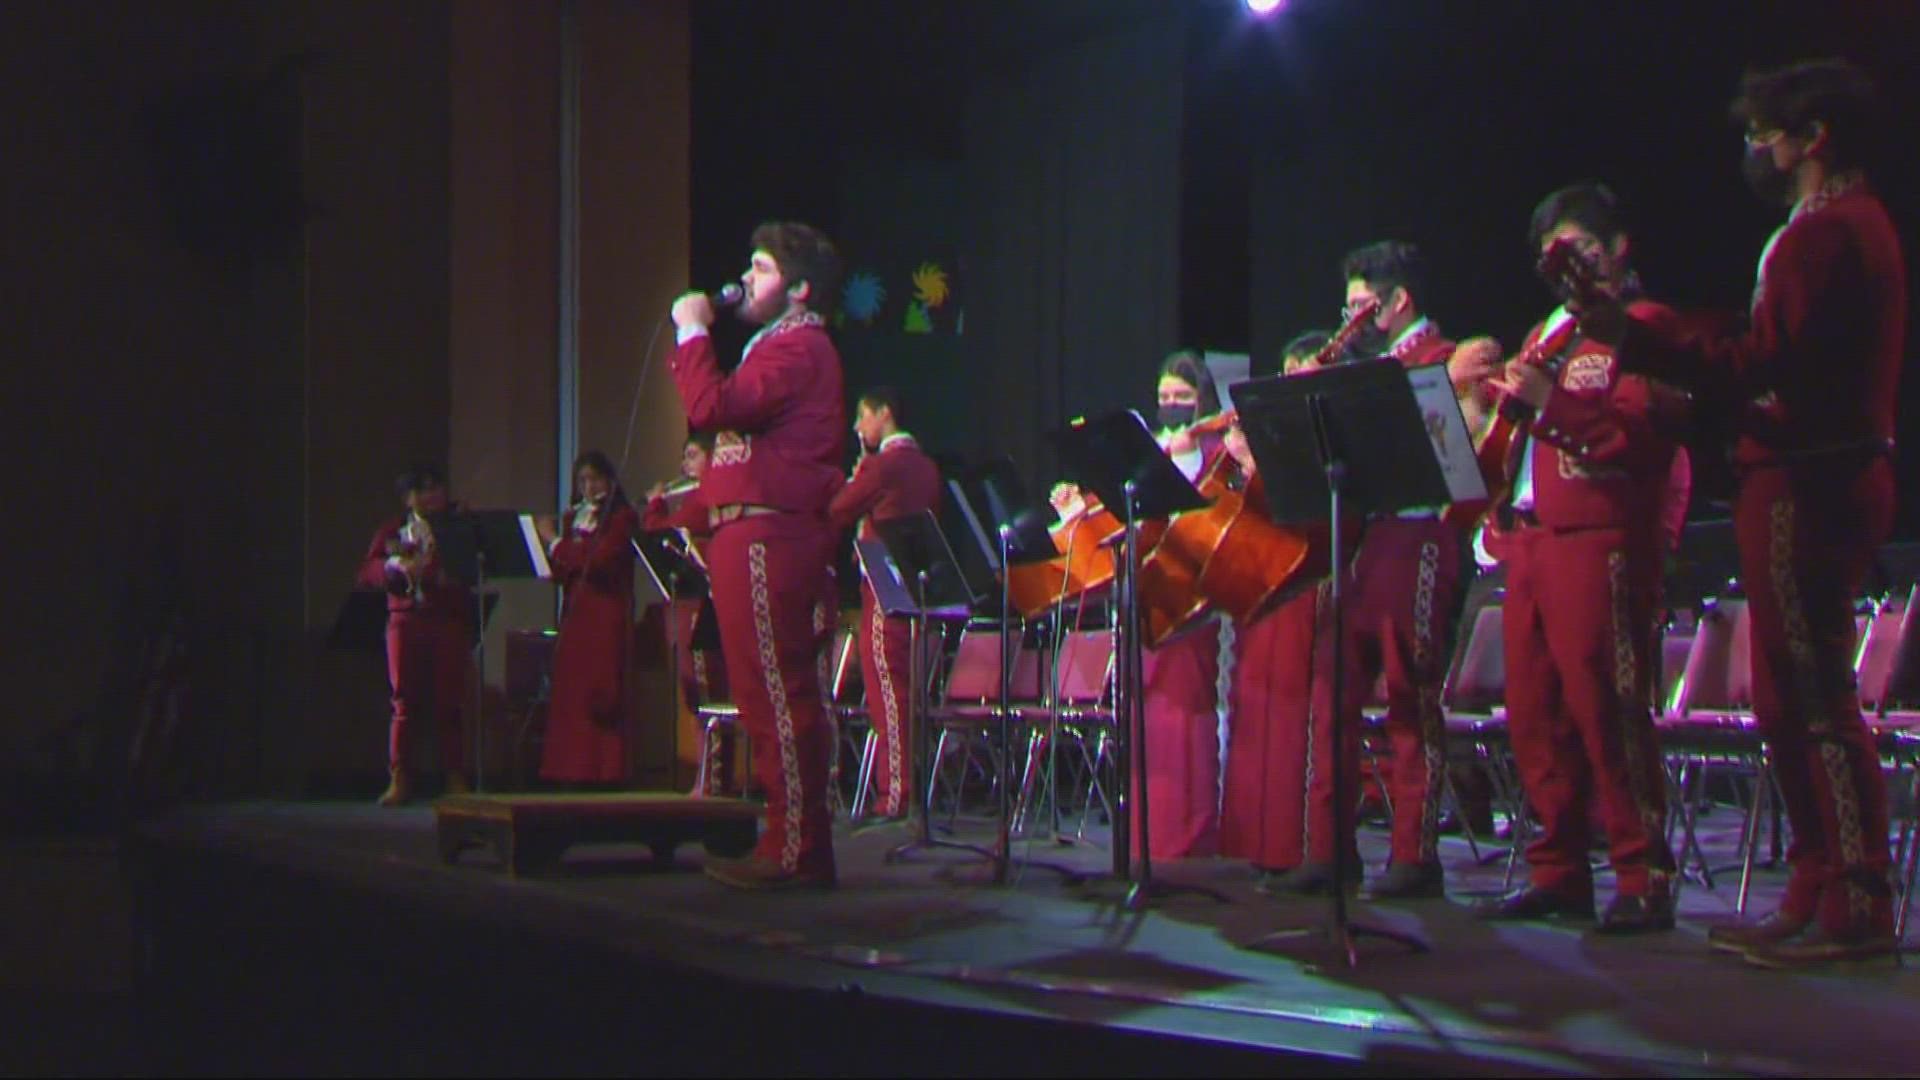 Student bandmembers represent multiple racial backgrounds but all celebrate the music and culture of mariachi. KGW's Katherine Cook reports.